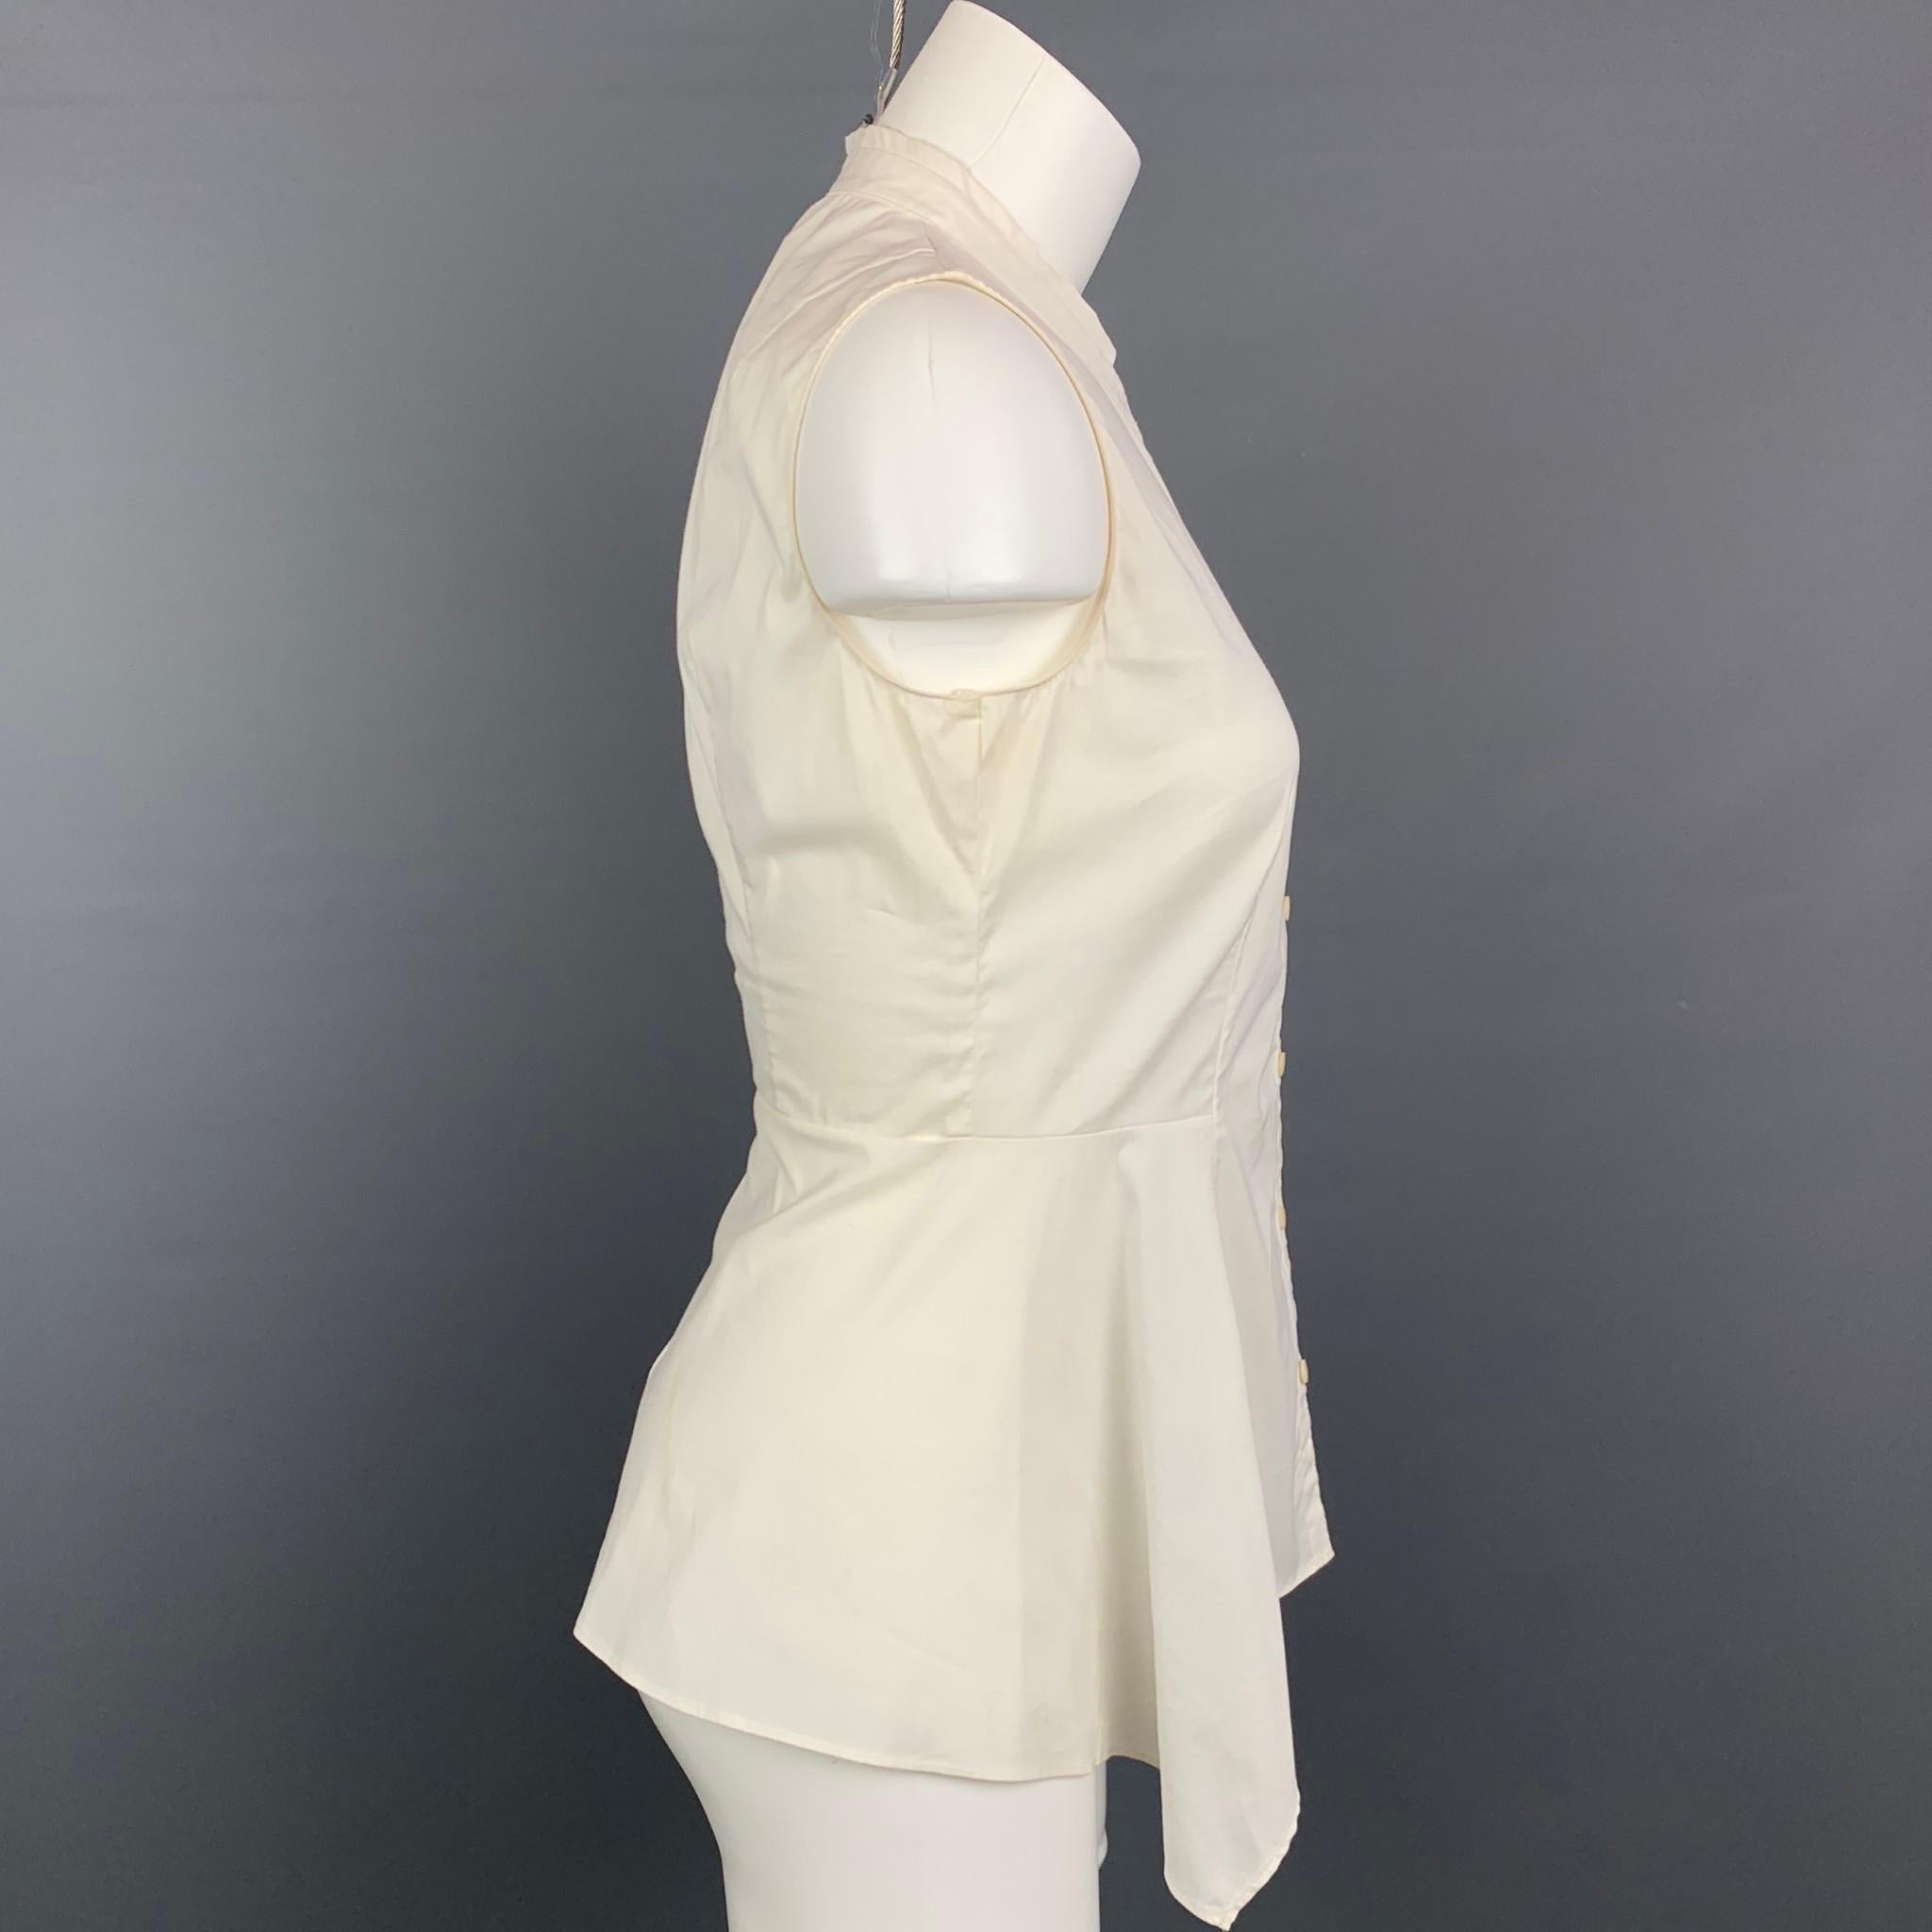 AKRIS blouse comes in a white poplin cotton blend featuring a collarless style, a-line, sleeveless, and a button closure. Made in Romania.

Very Good Pre-Owned Condition.
Marked: US 4 / F 36 / D 34

Measurements:

Shoulder: 14.5 in.
Bust: 32